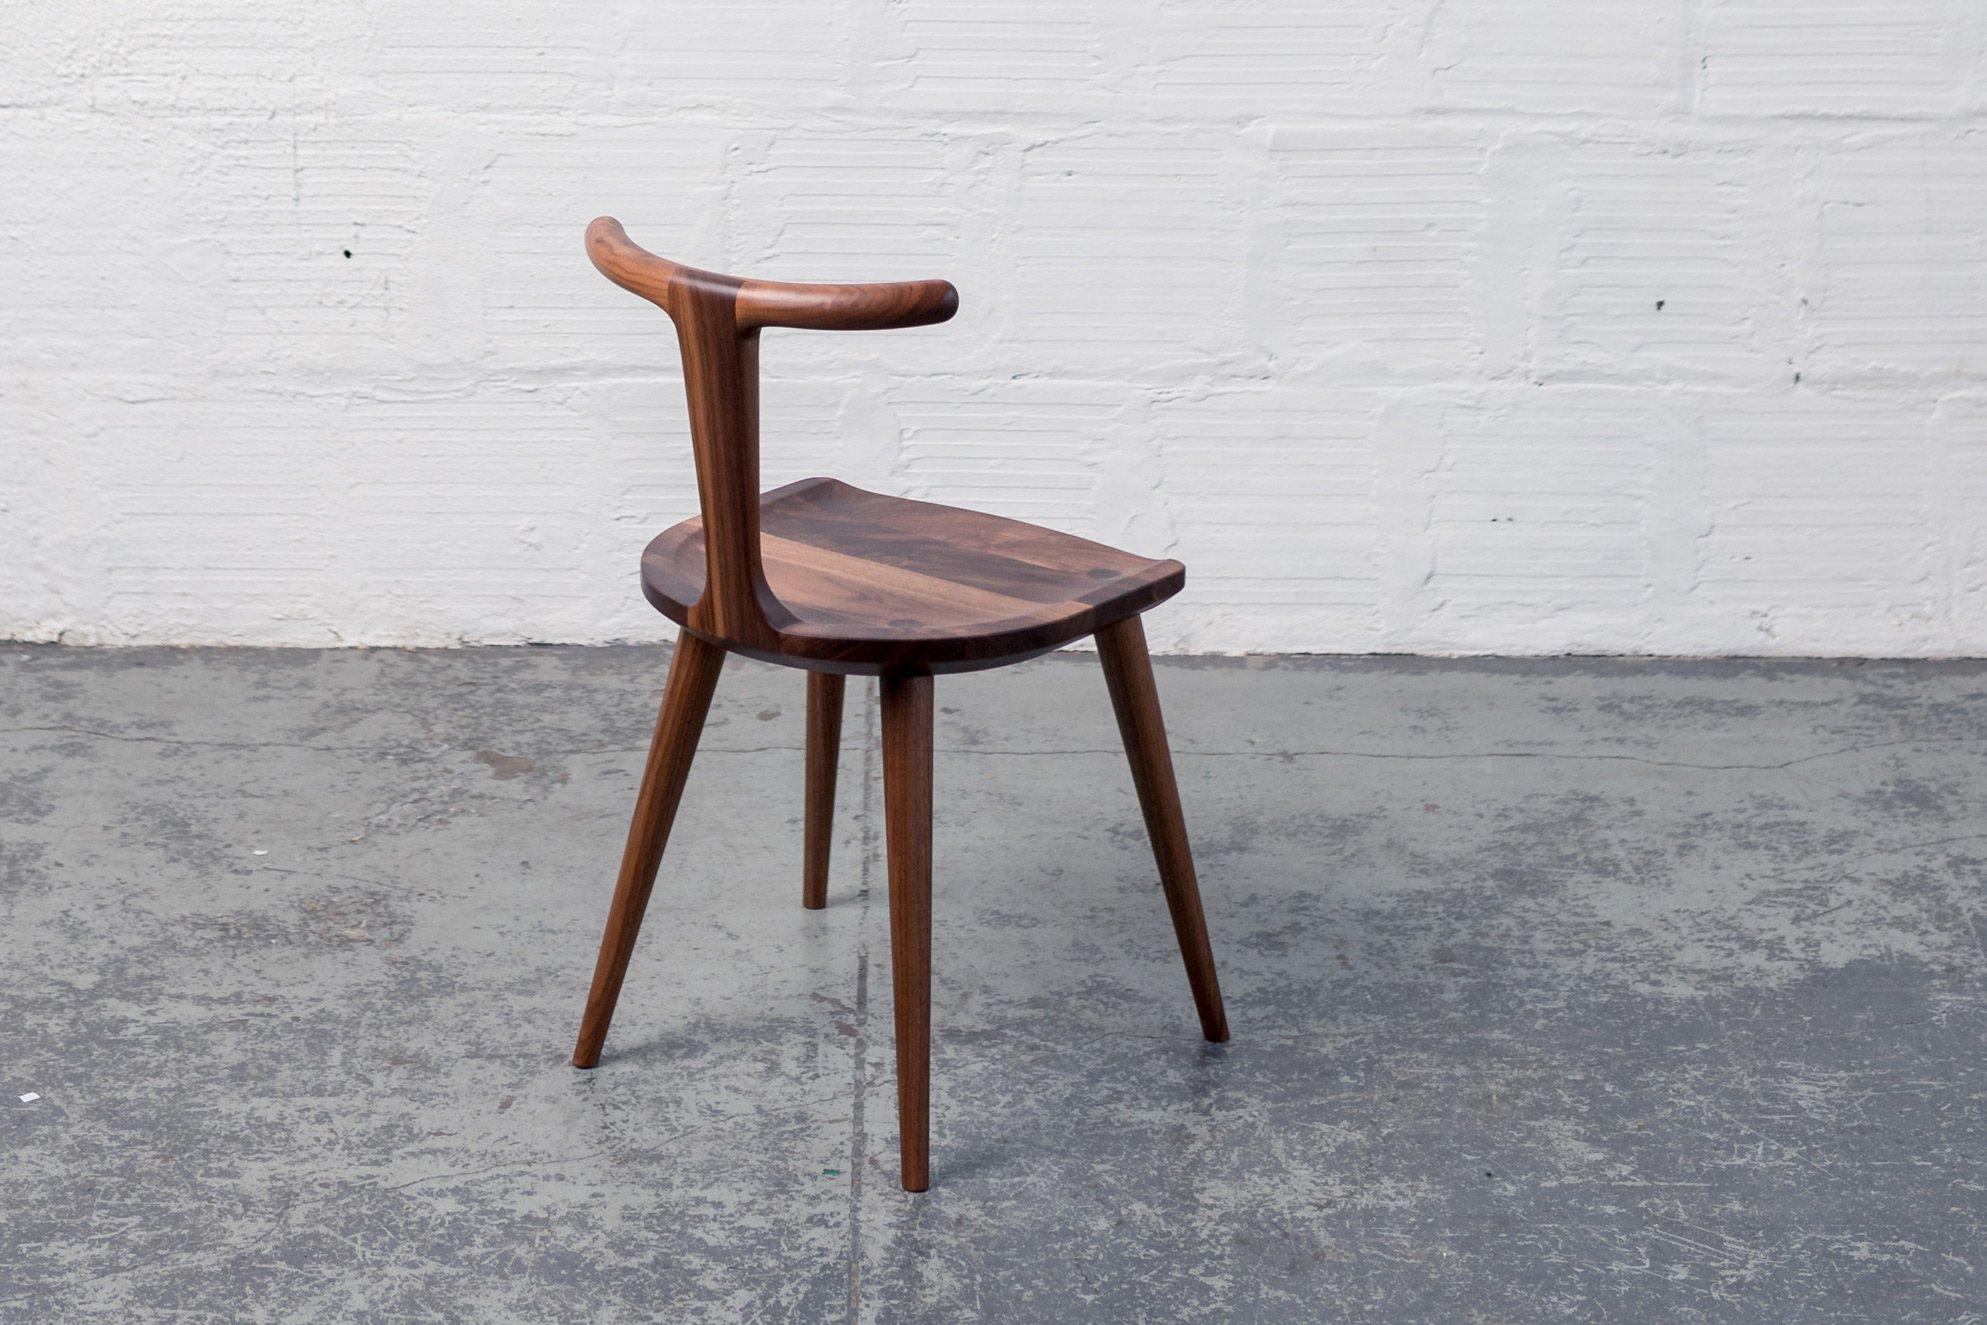 American Walnut Oxbend Chair with Leather Seat Pad by Fernweh Woodworking